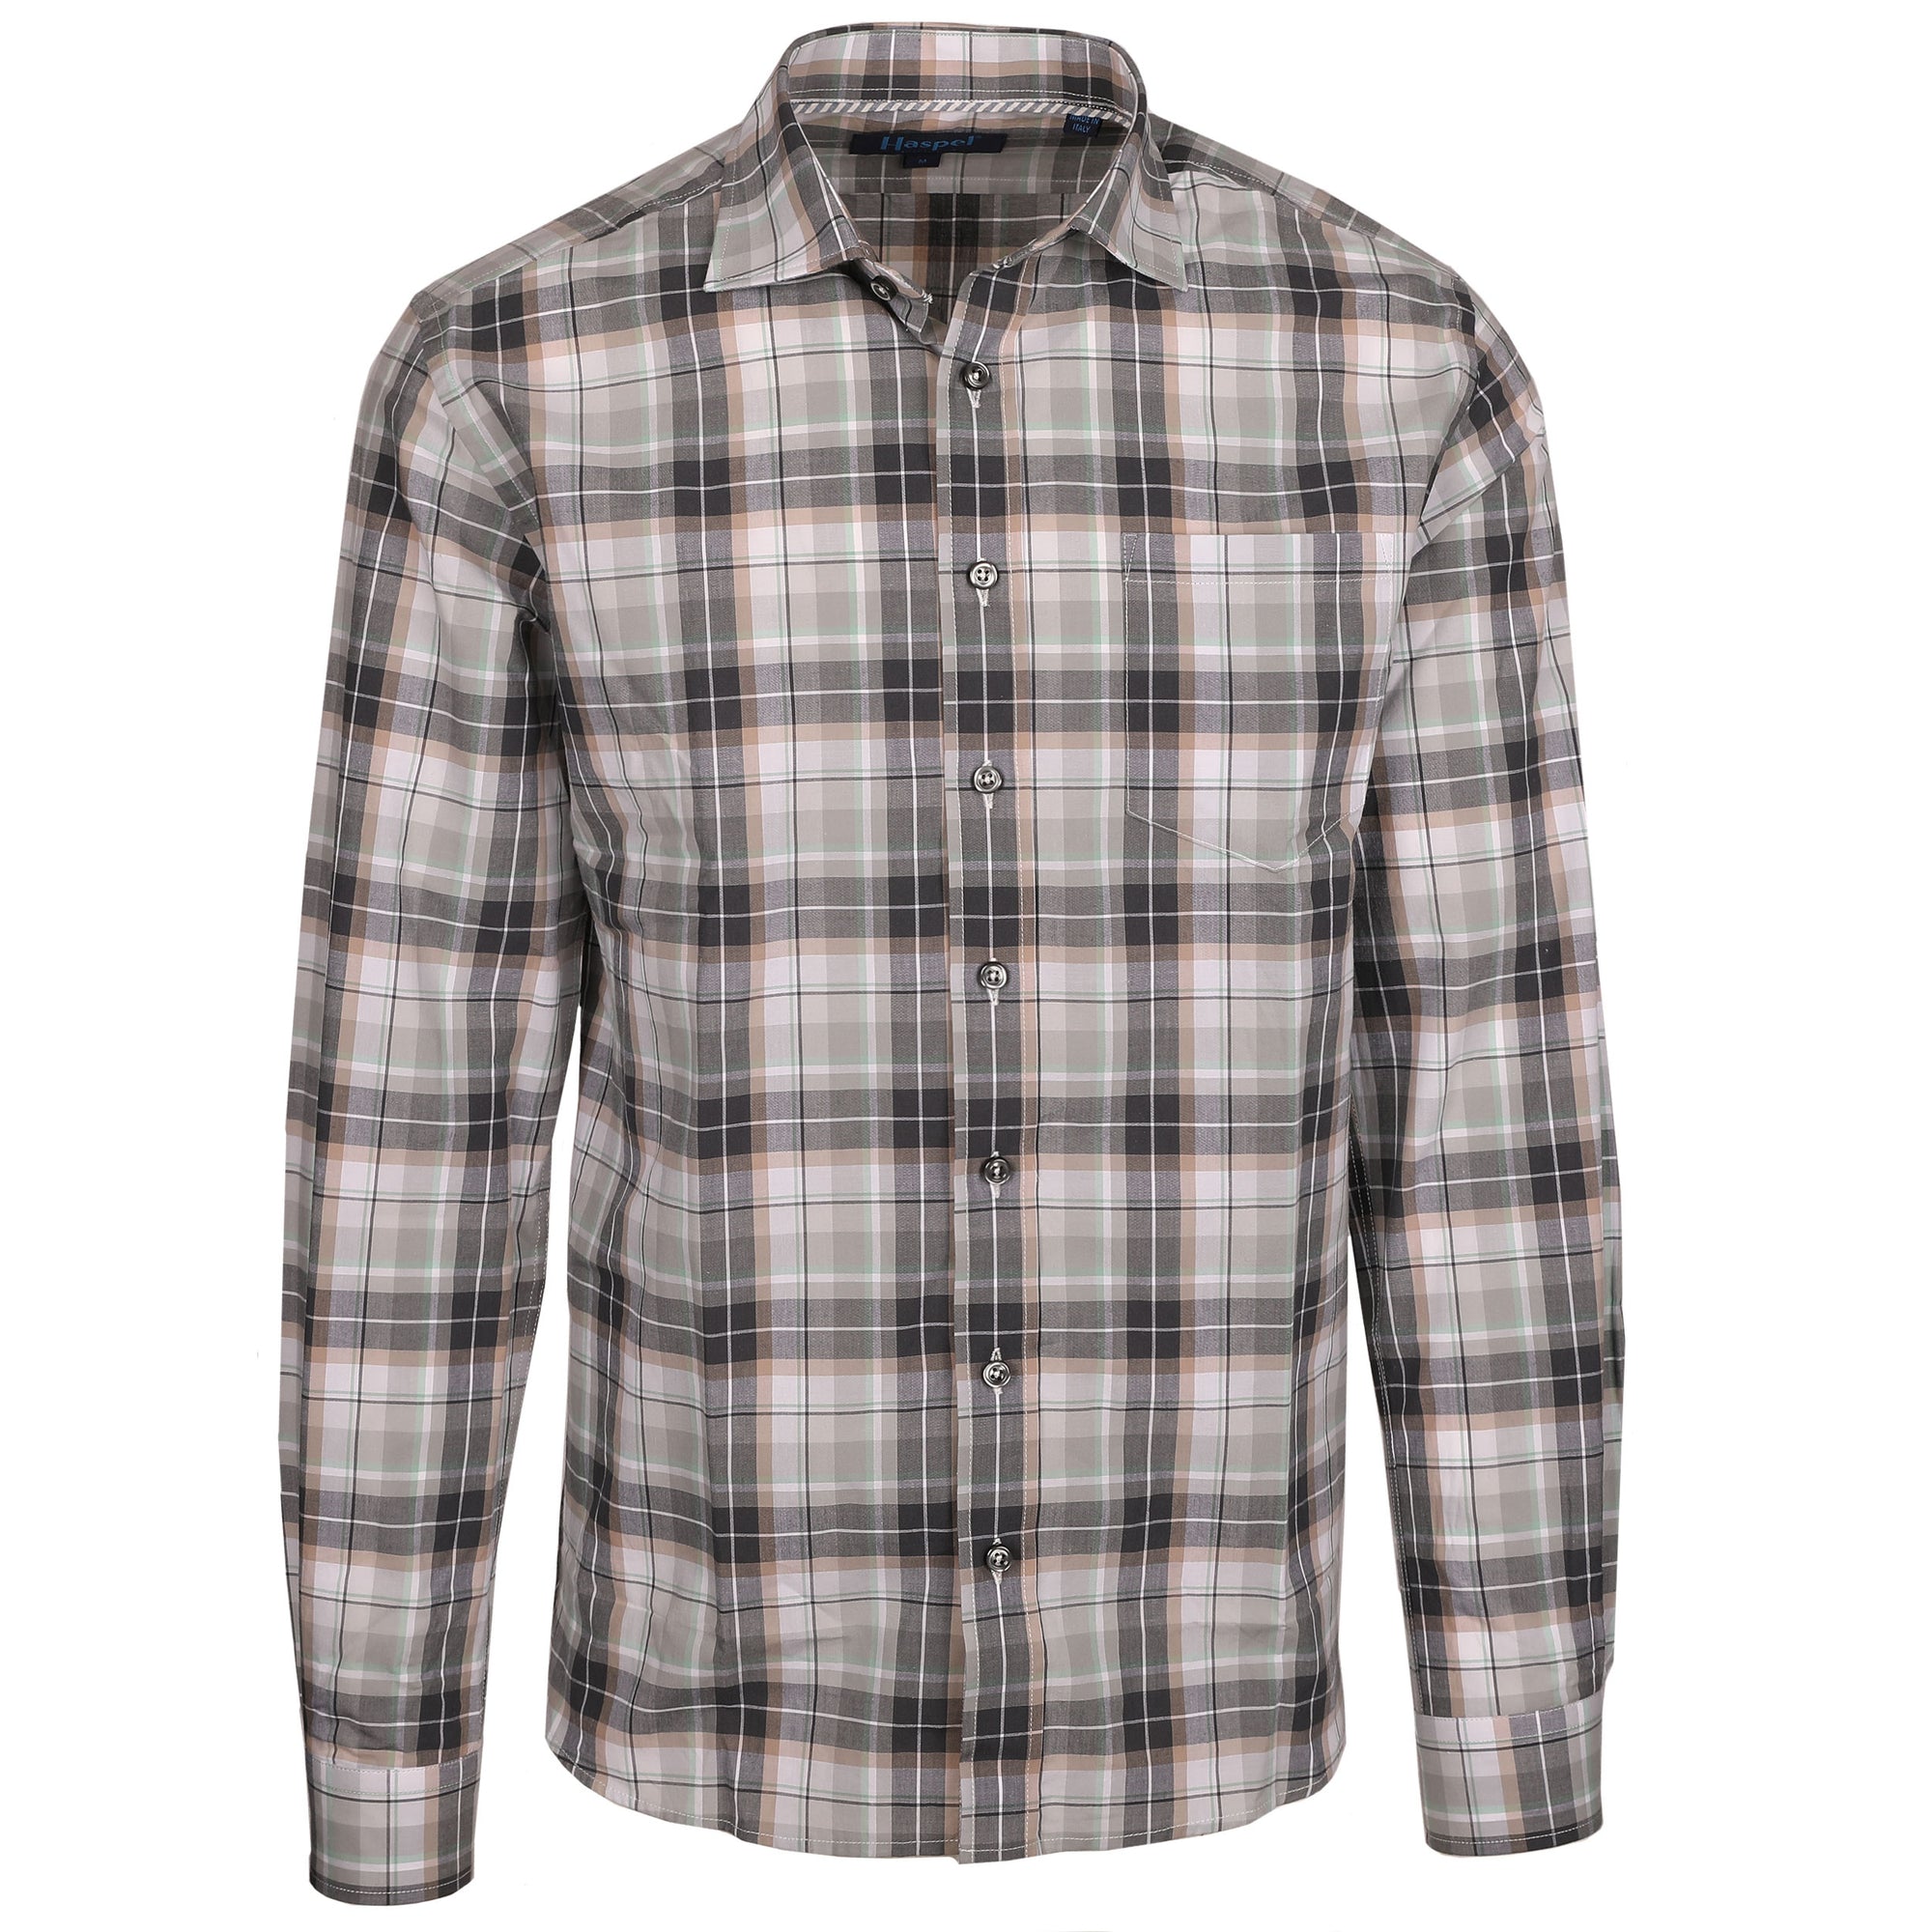 The Audubon Gray, Tan & Green Plaid shirt adds a classic touch to any wardrobe. Crafted from lightweight cotton, this plaid shirt is comfortable and breathable. The stylishly designed steely grey buttons give a modern edge to the traditional grey and tan pattern.  100% Cotton • Spread Collar • Long Sleeve • Chest Pocket • Machine Washable • Made in Italy • Return Policy